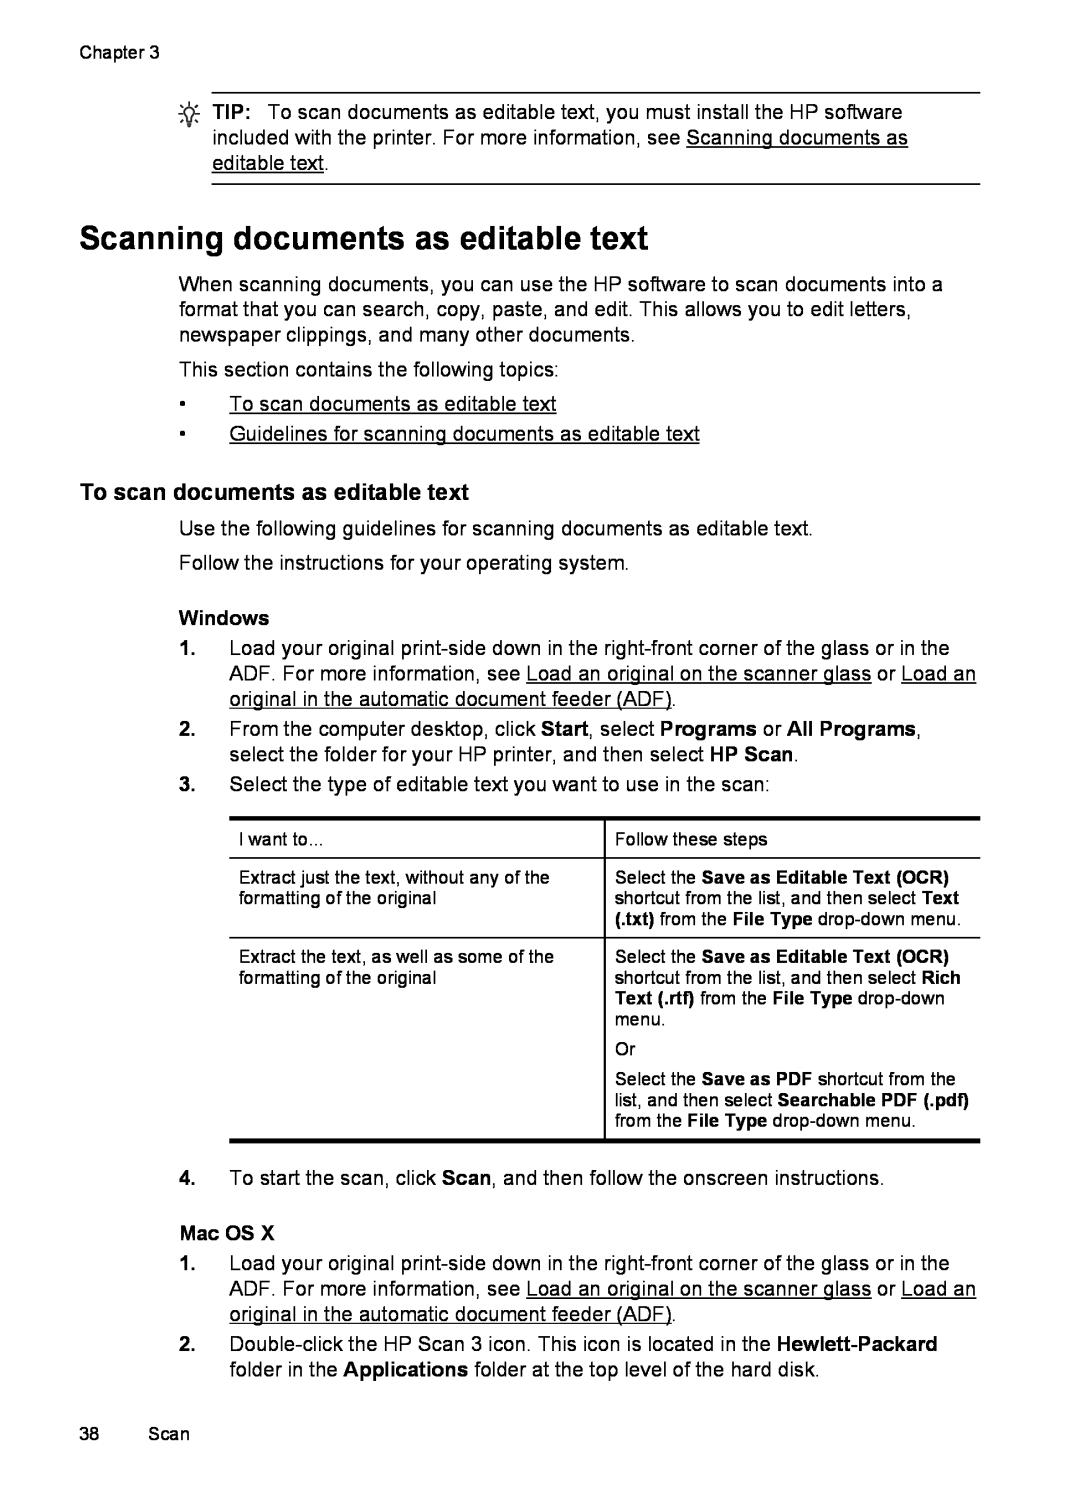 HP 6600 - H7 manual Scanning documents as editable text, To scan documents as editable text, Windows, Mac OS 